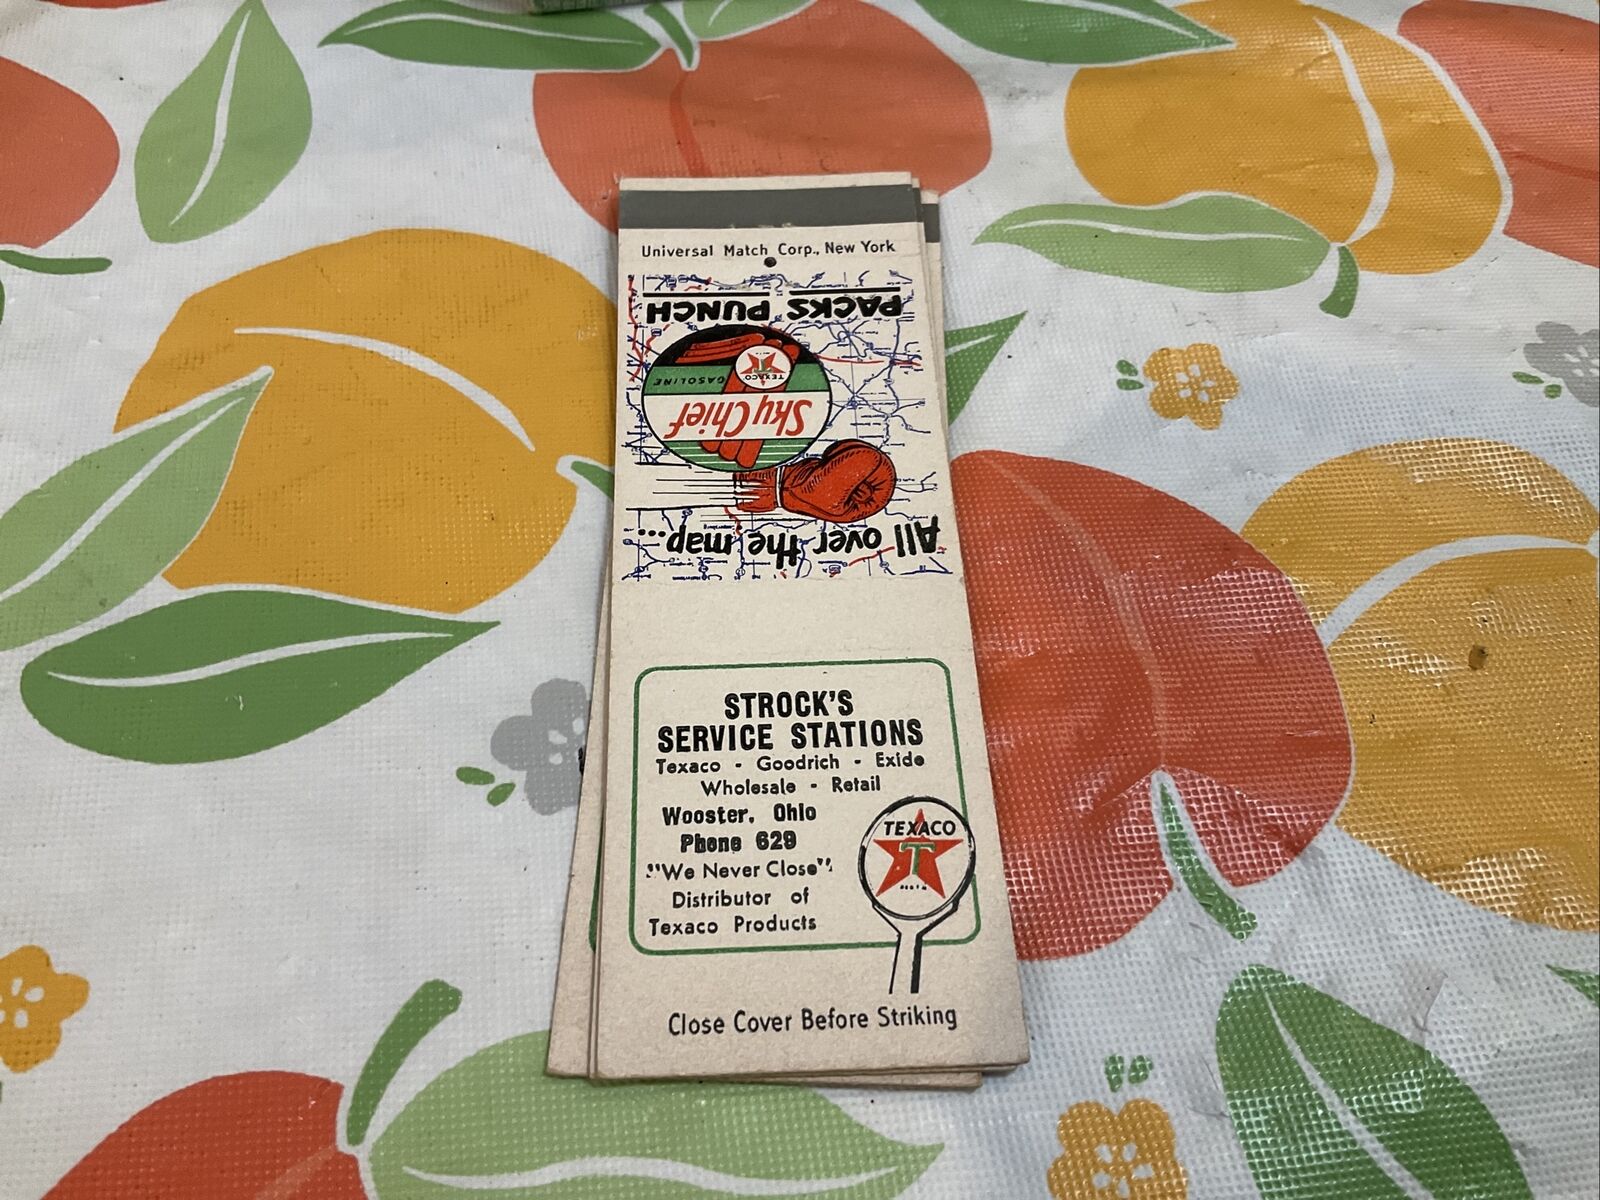 VTG Matchbook Texaco Sky Chief Packs Punch Strock’s Service Station Wooster Ohio